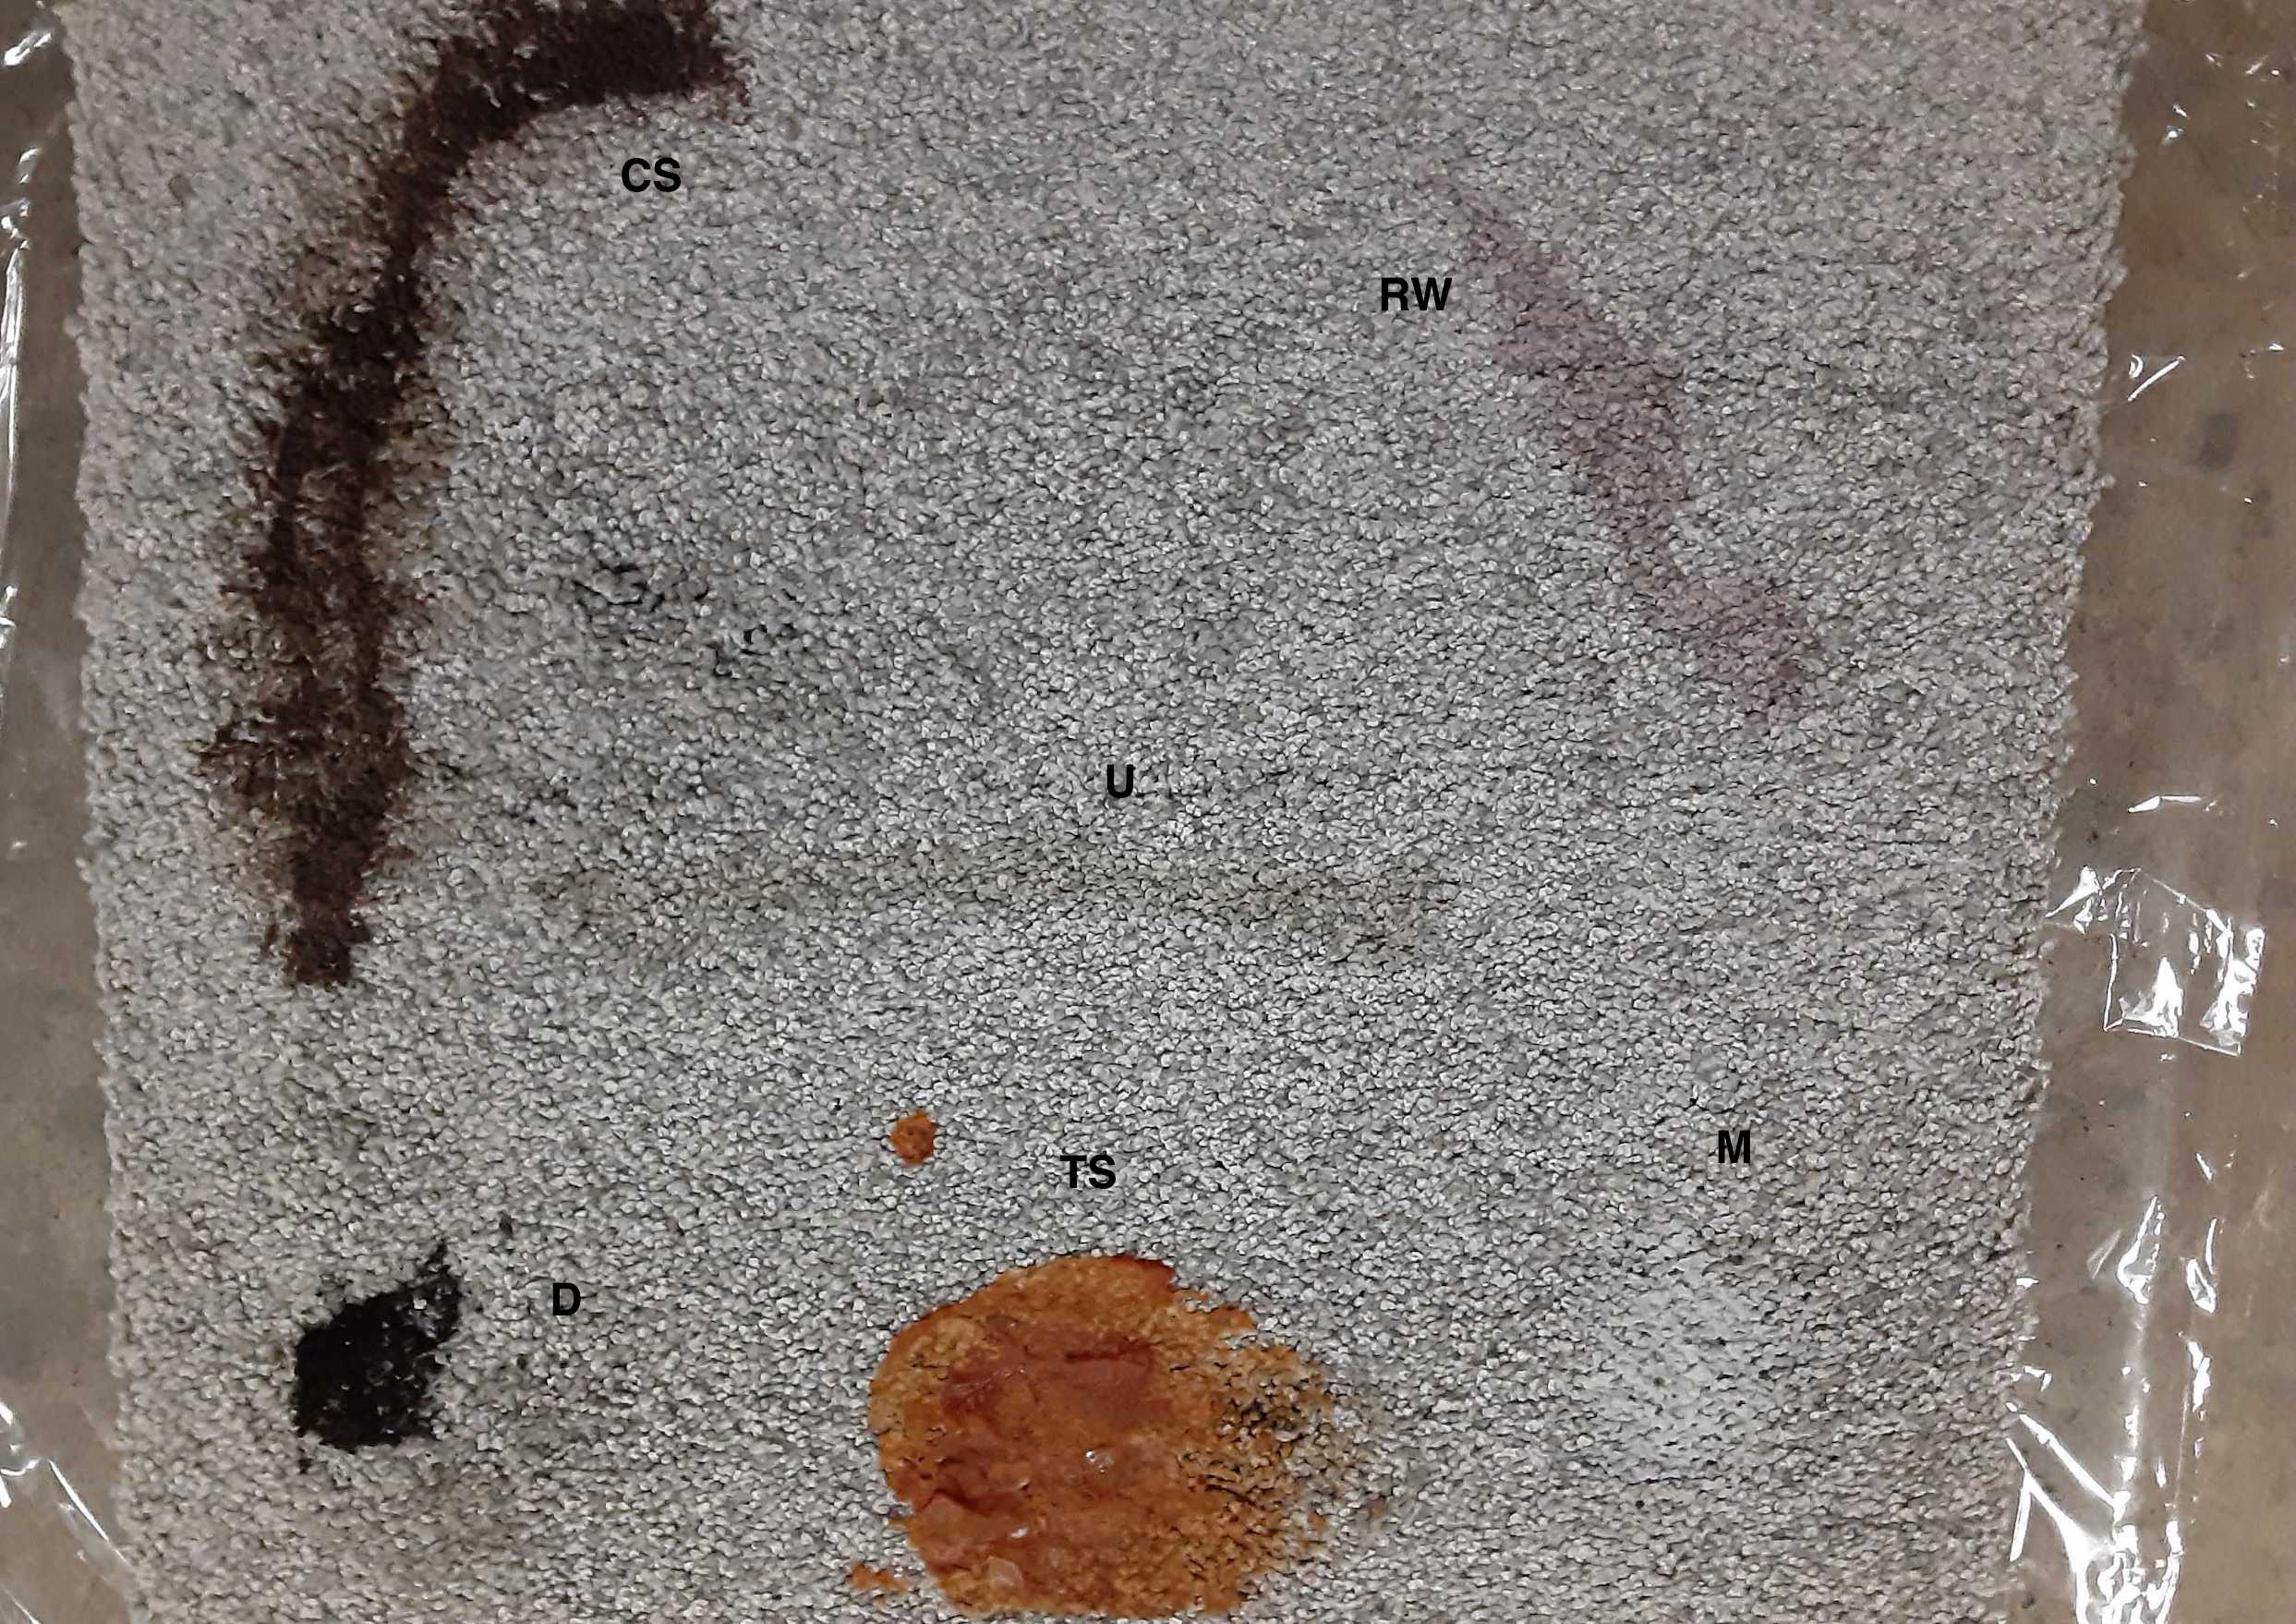 A test carpet with food stains.